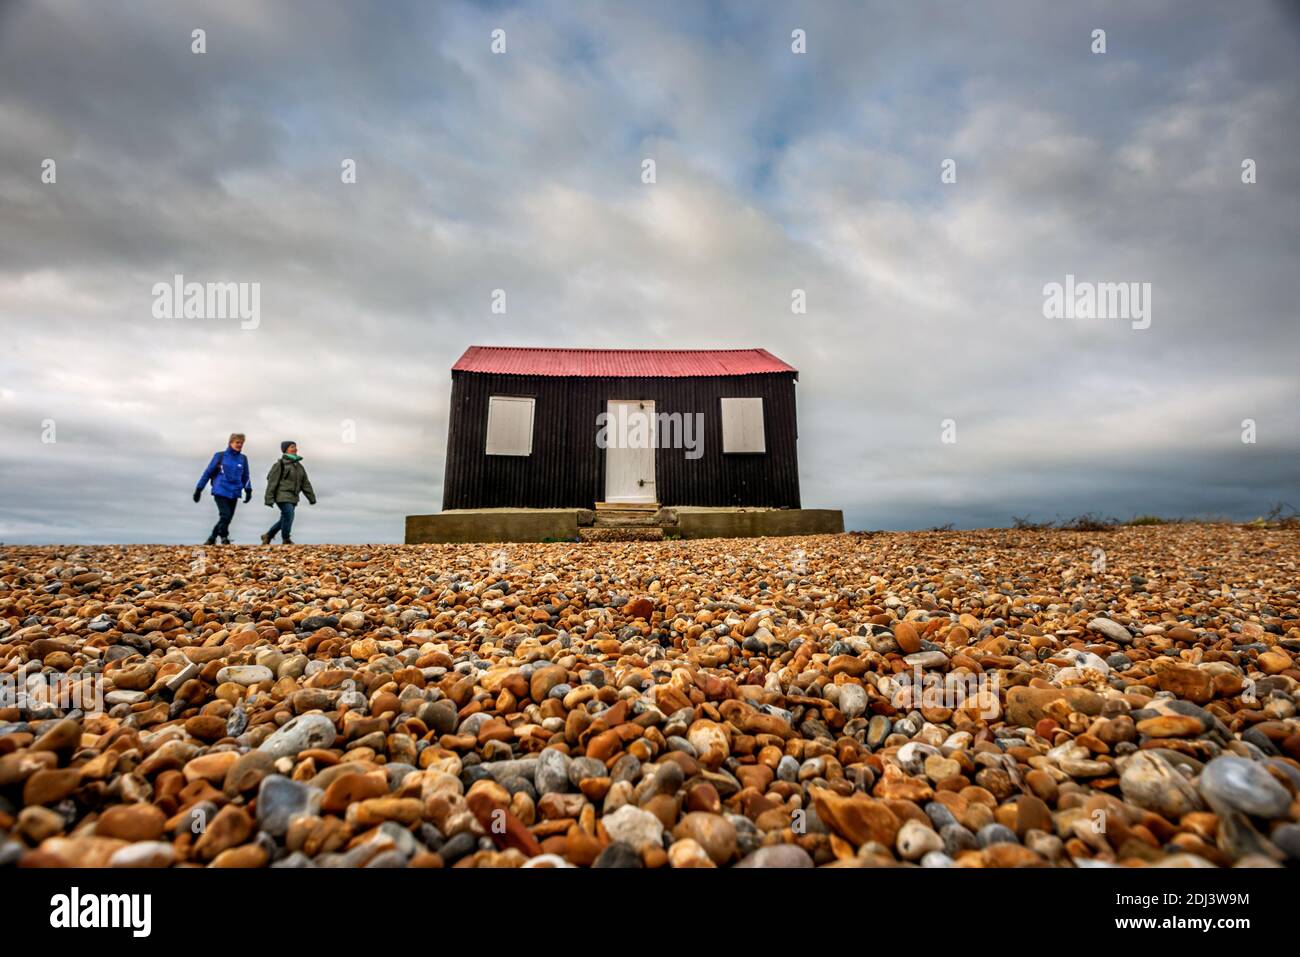 Rye Harbour, December 12th 2020: Storm clouds gather over the iconic red roofed hut that sits on the shingle beach at the entrance to Rye Harbour Credit: Andrew Hasson/Alamy Live News Stock Photo